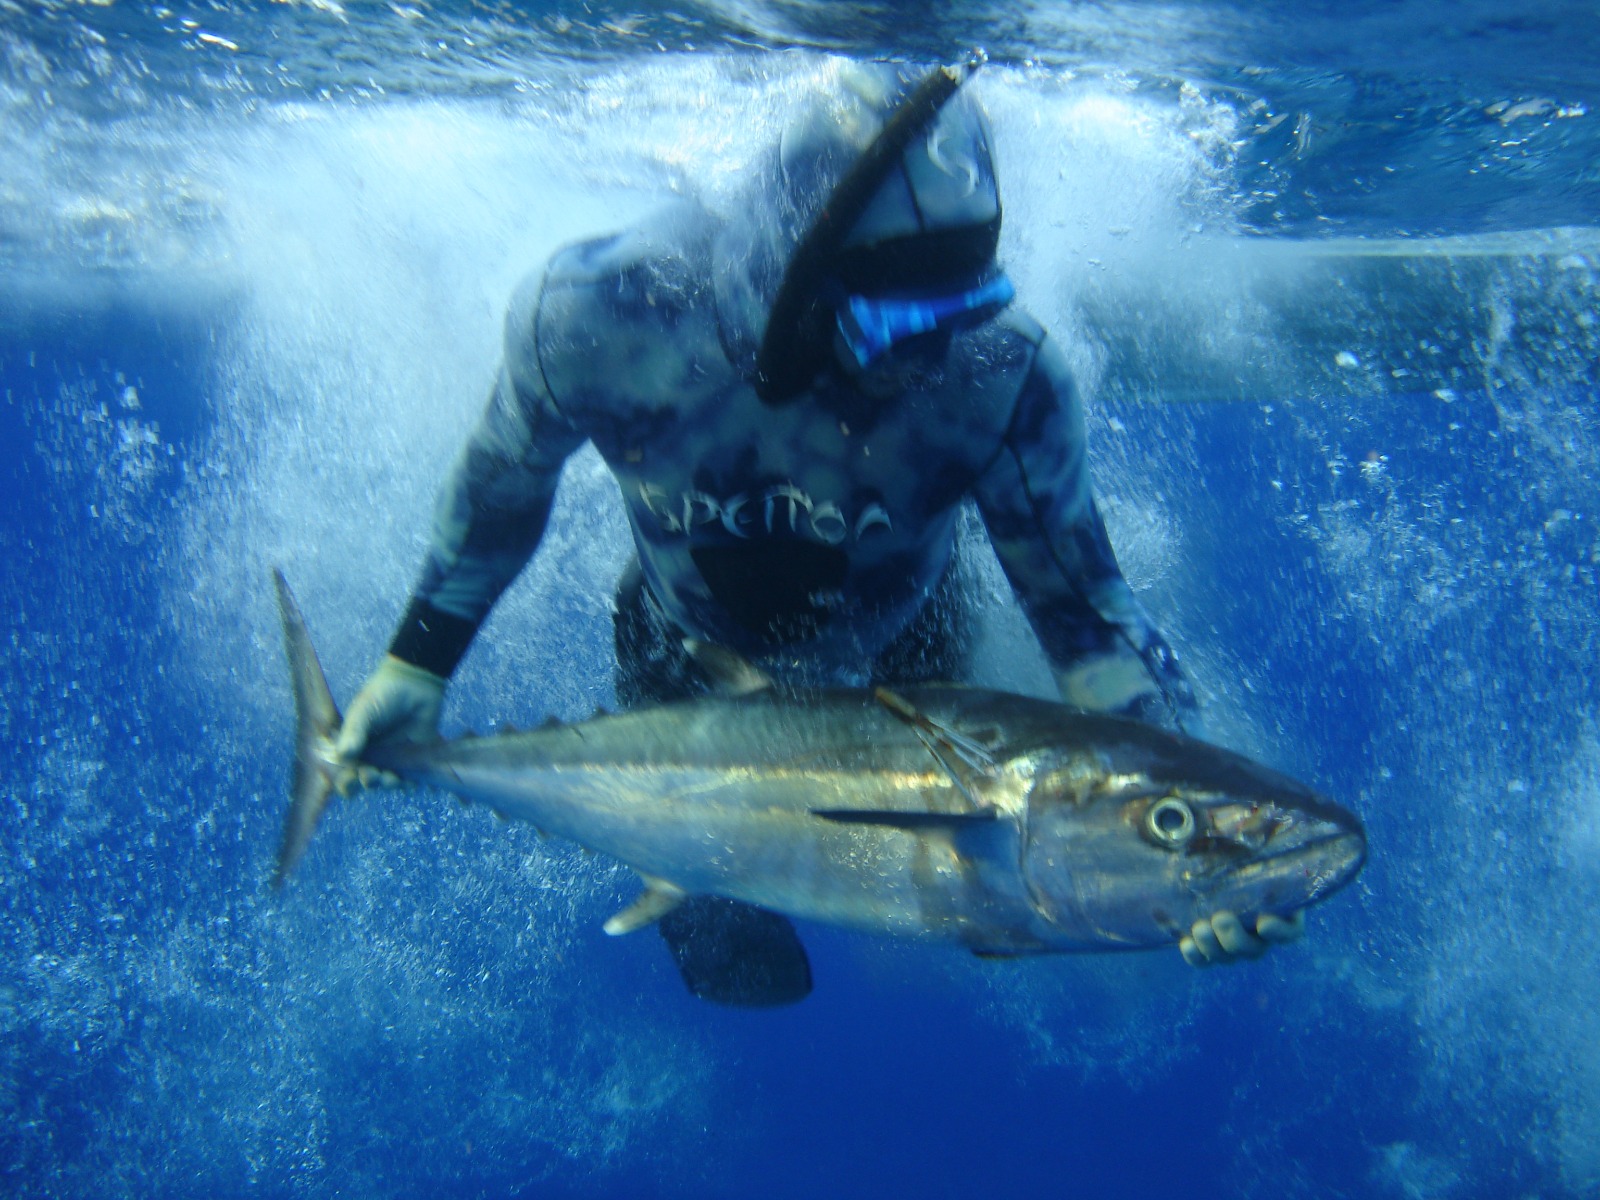 Underwater game: An introduction to spearfishing